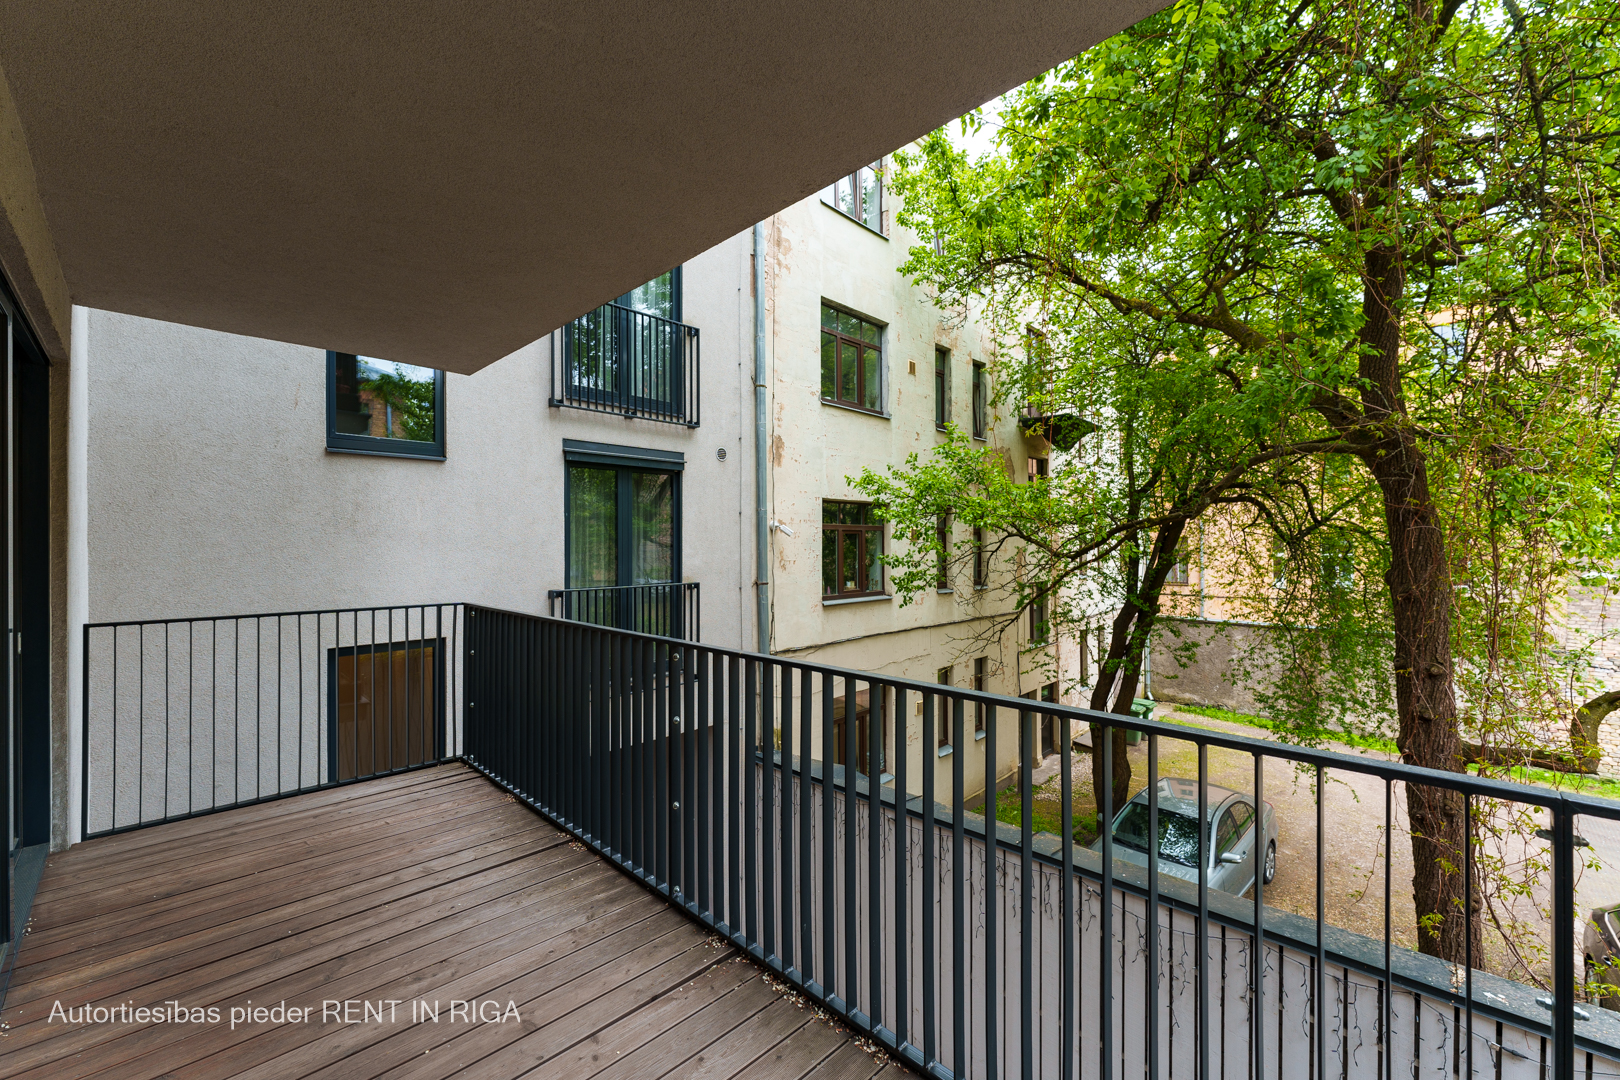 Apartment for rent, Valkas street 4 - Image 1